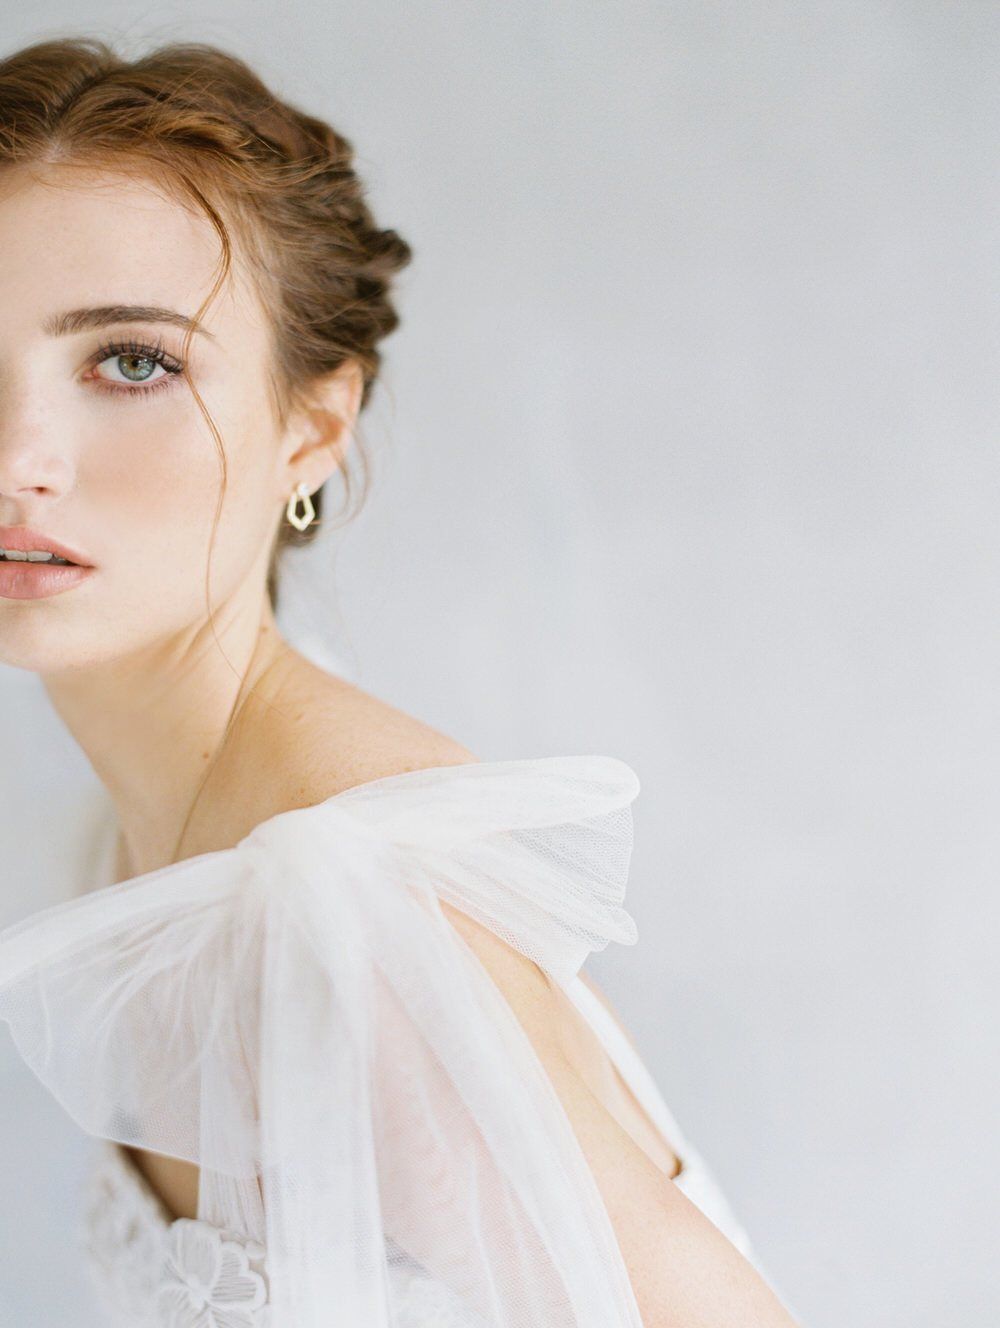 Romantic High-Fashion Bridal Looks For the Chic Bride ? Ruffled - Romantic High-Fashion Bridal Looks For the Chic Bride ? Ruffled -   12 beauty Shoot bride ideas